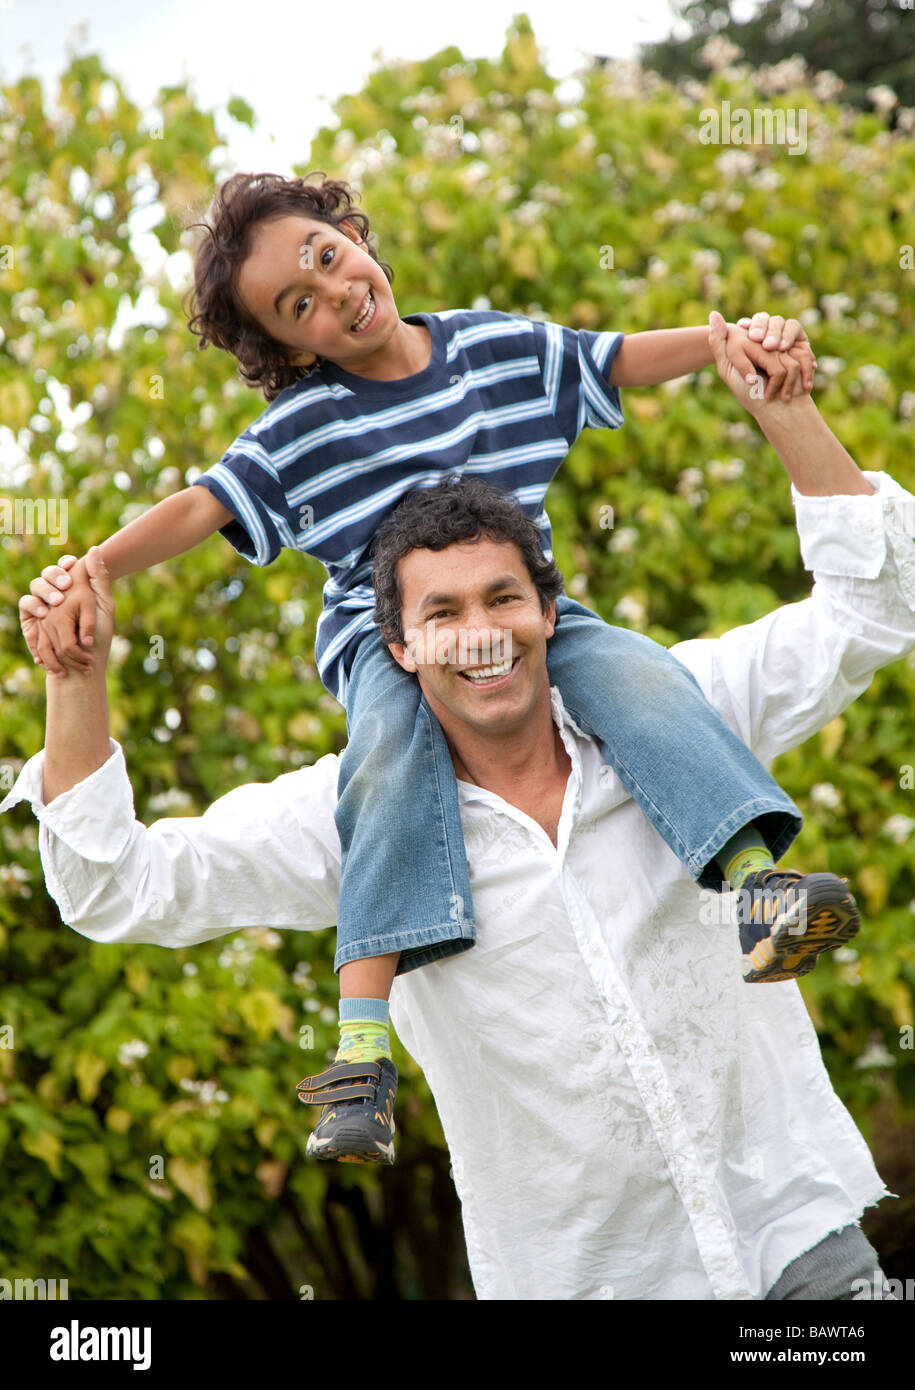 father and son having fun Stock Photo